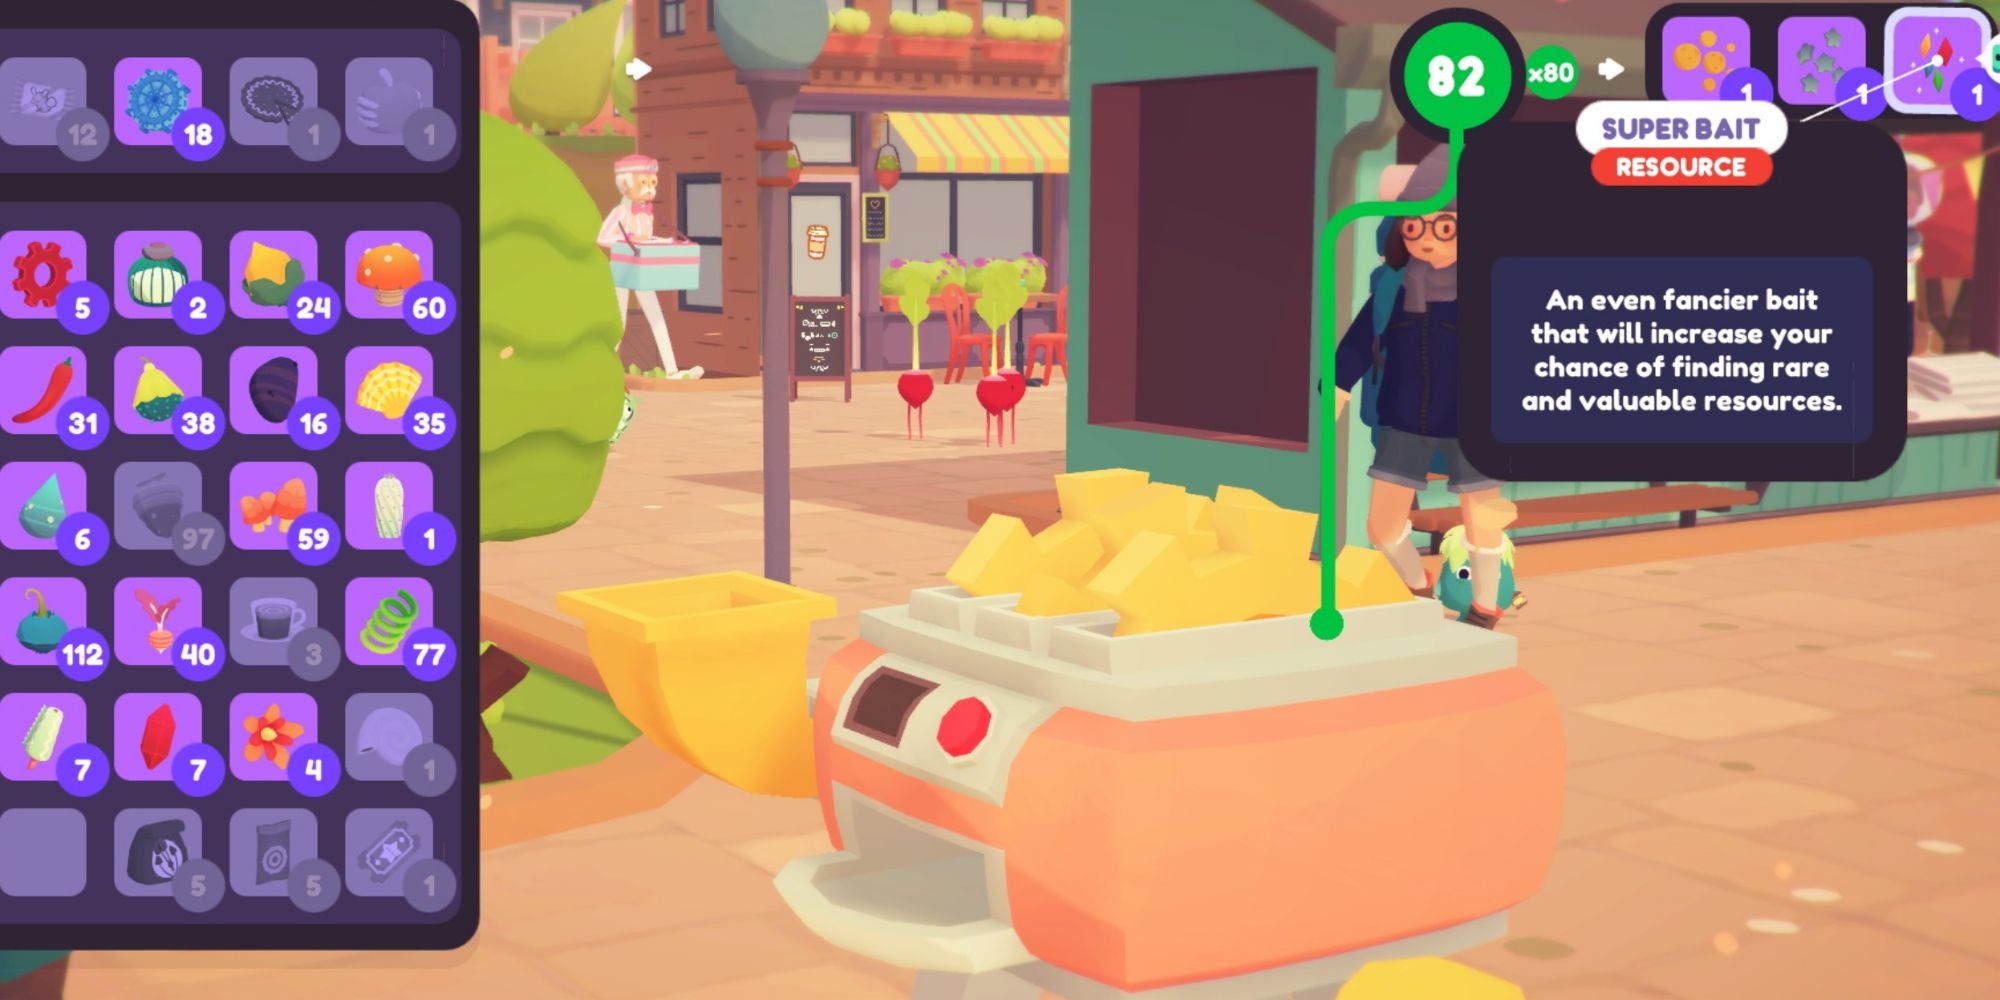 Ooblets: How To Get Better Bait